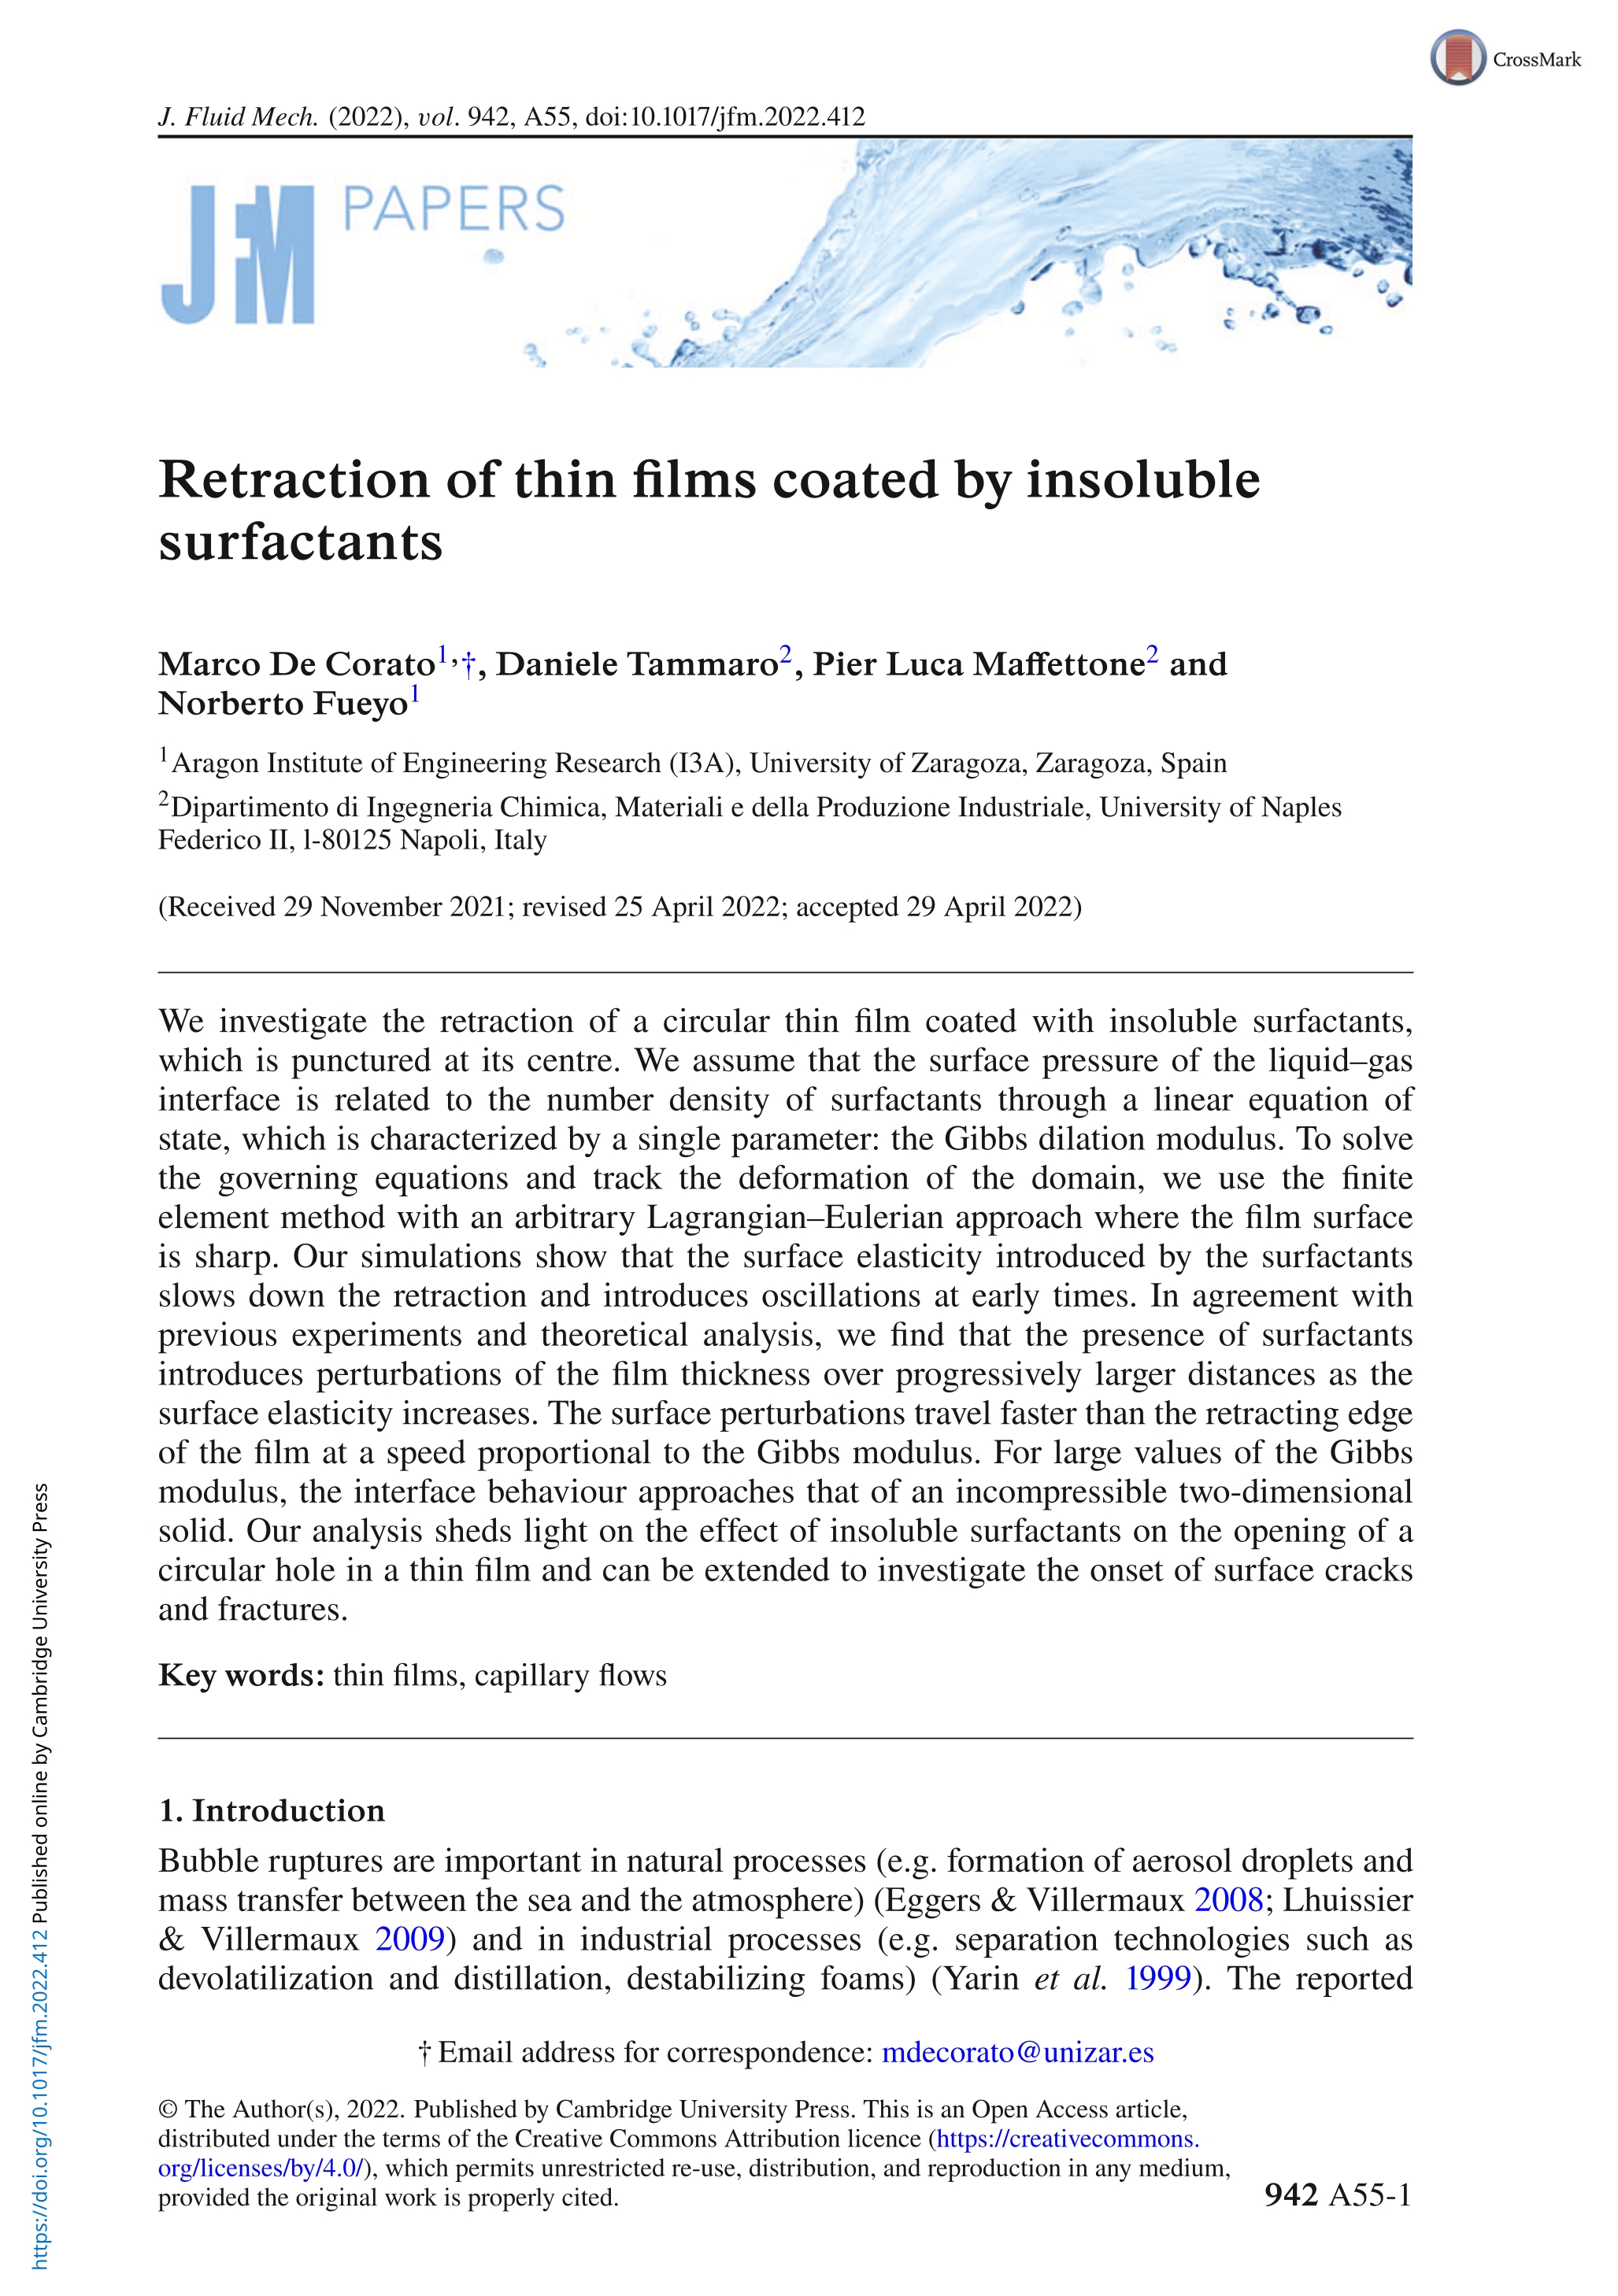 Retraction of thin films coated by insoluble surfactants